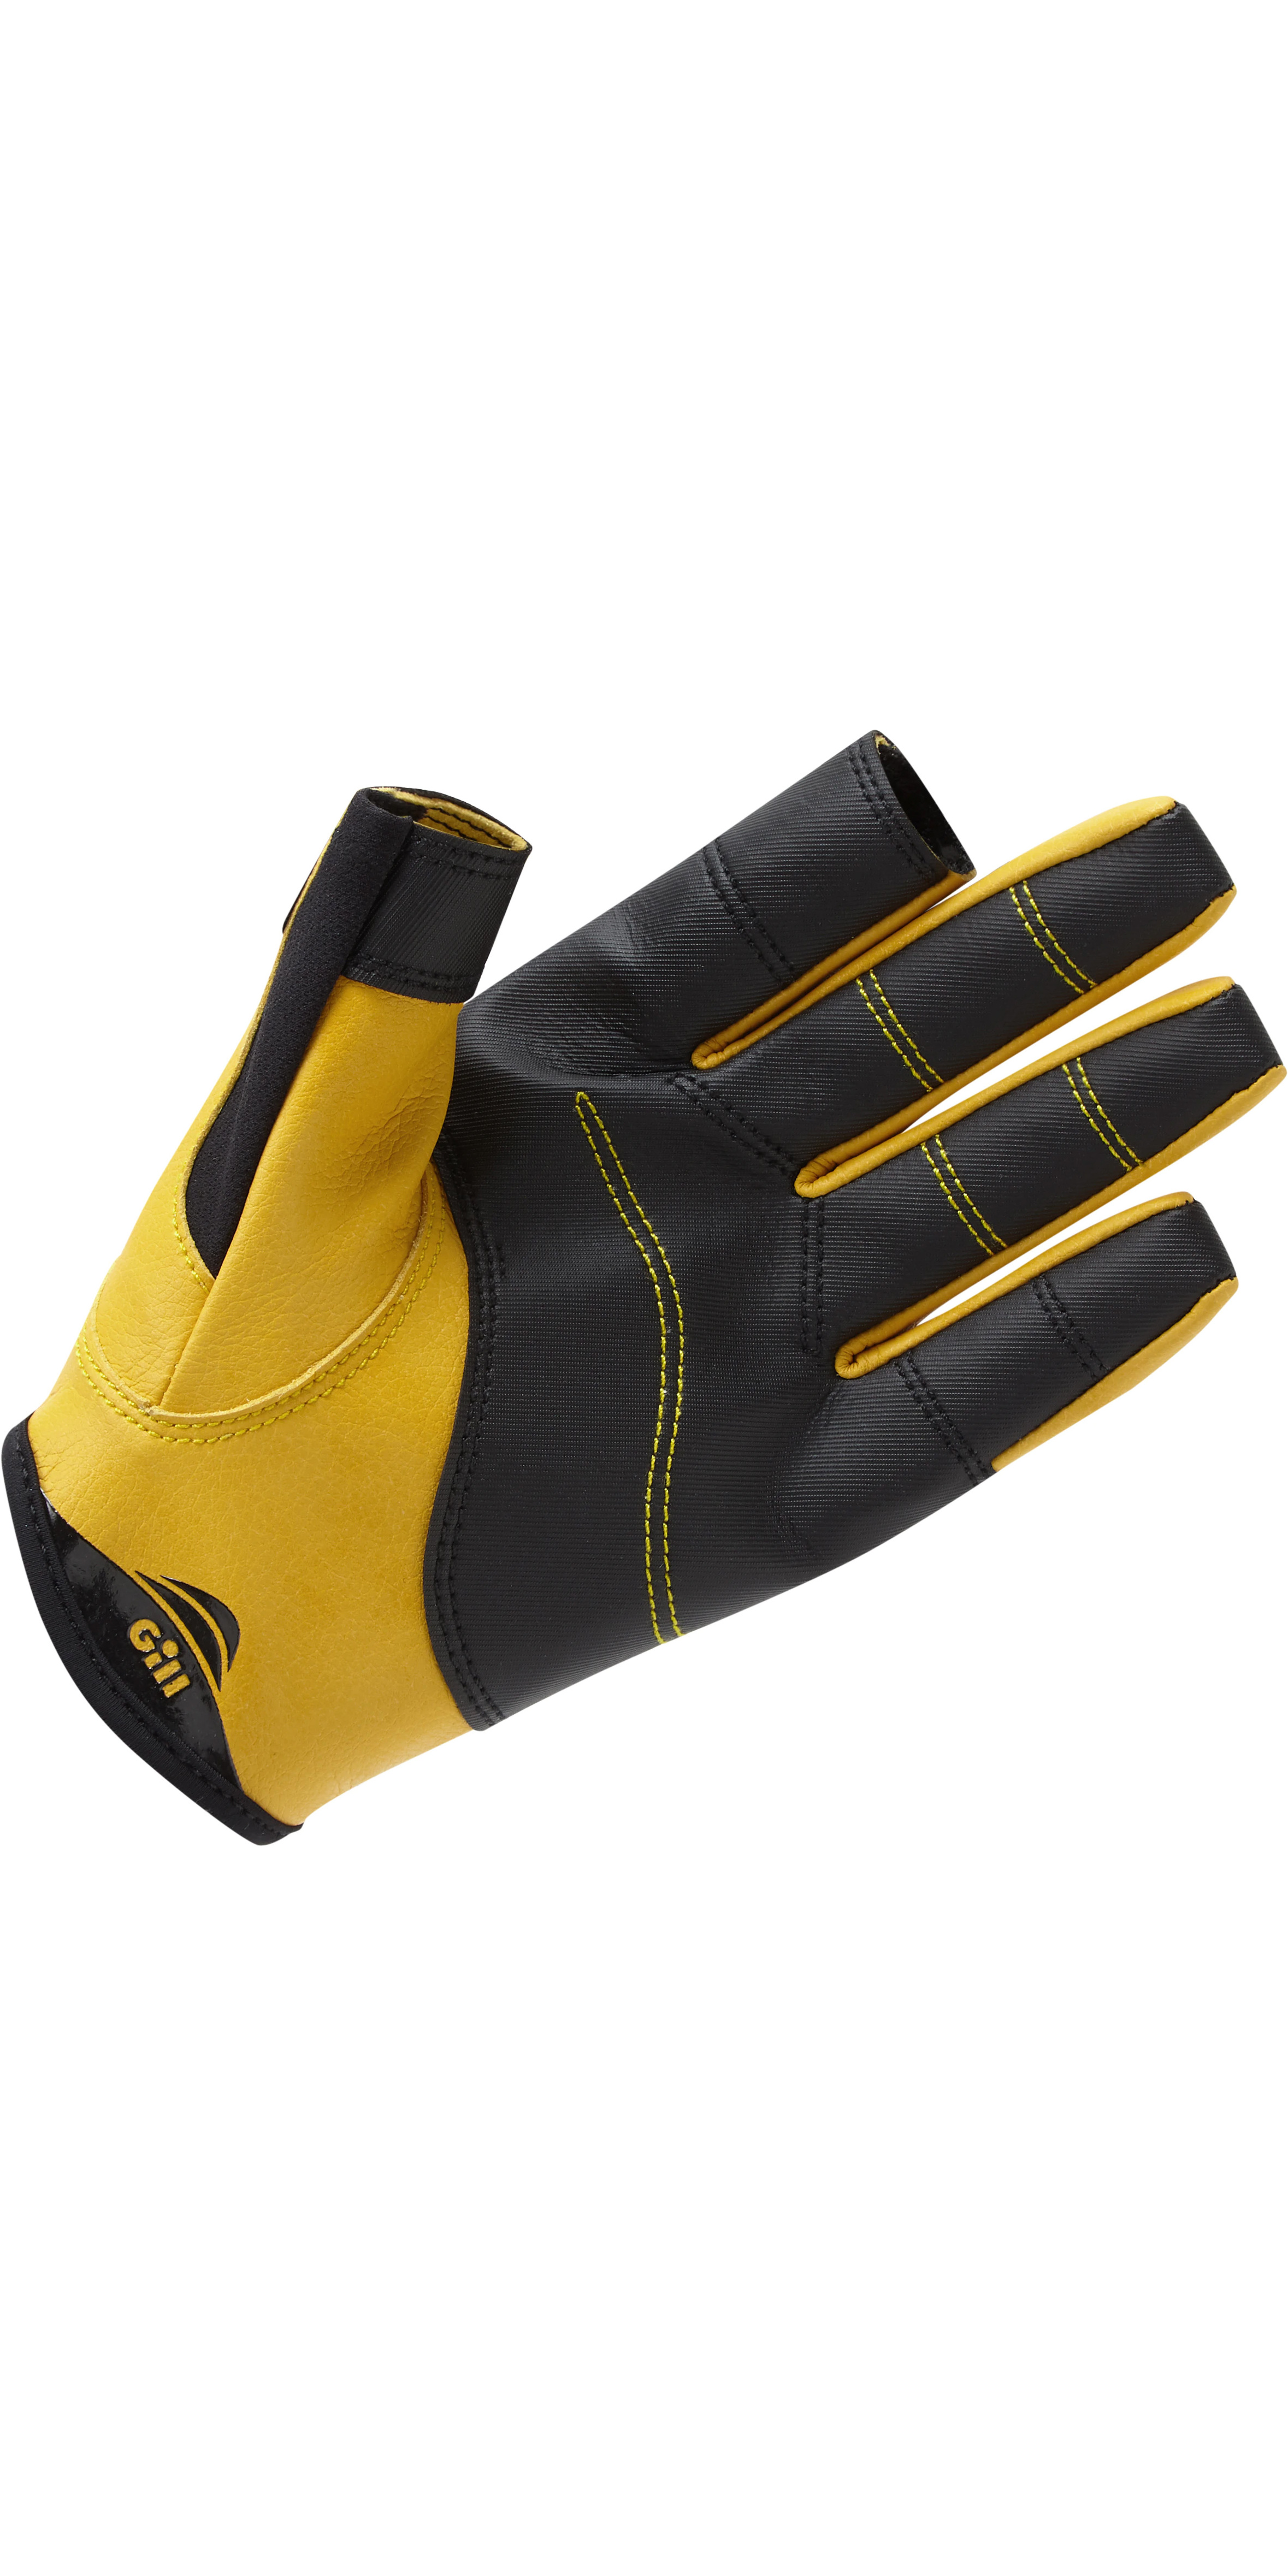 Easy Stretch Race proven flexibility and comfort Gill Pro Long Finger Sailing Yachting and Dinghy Gloves